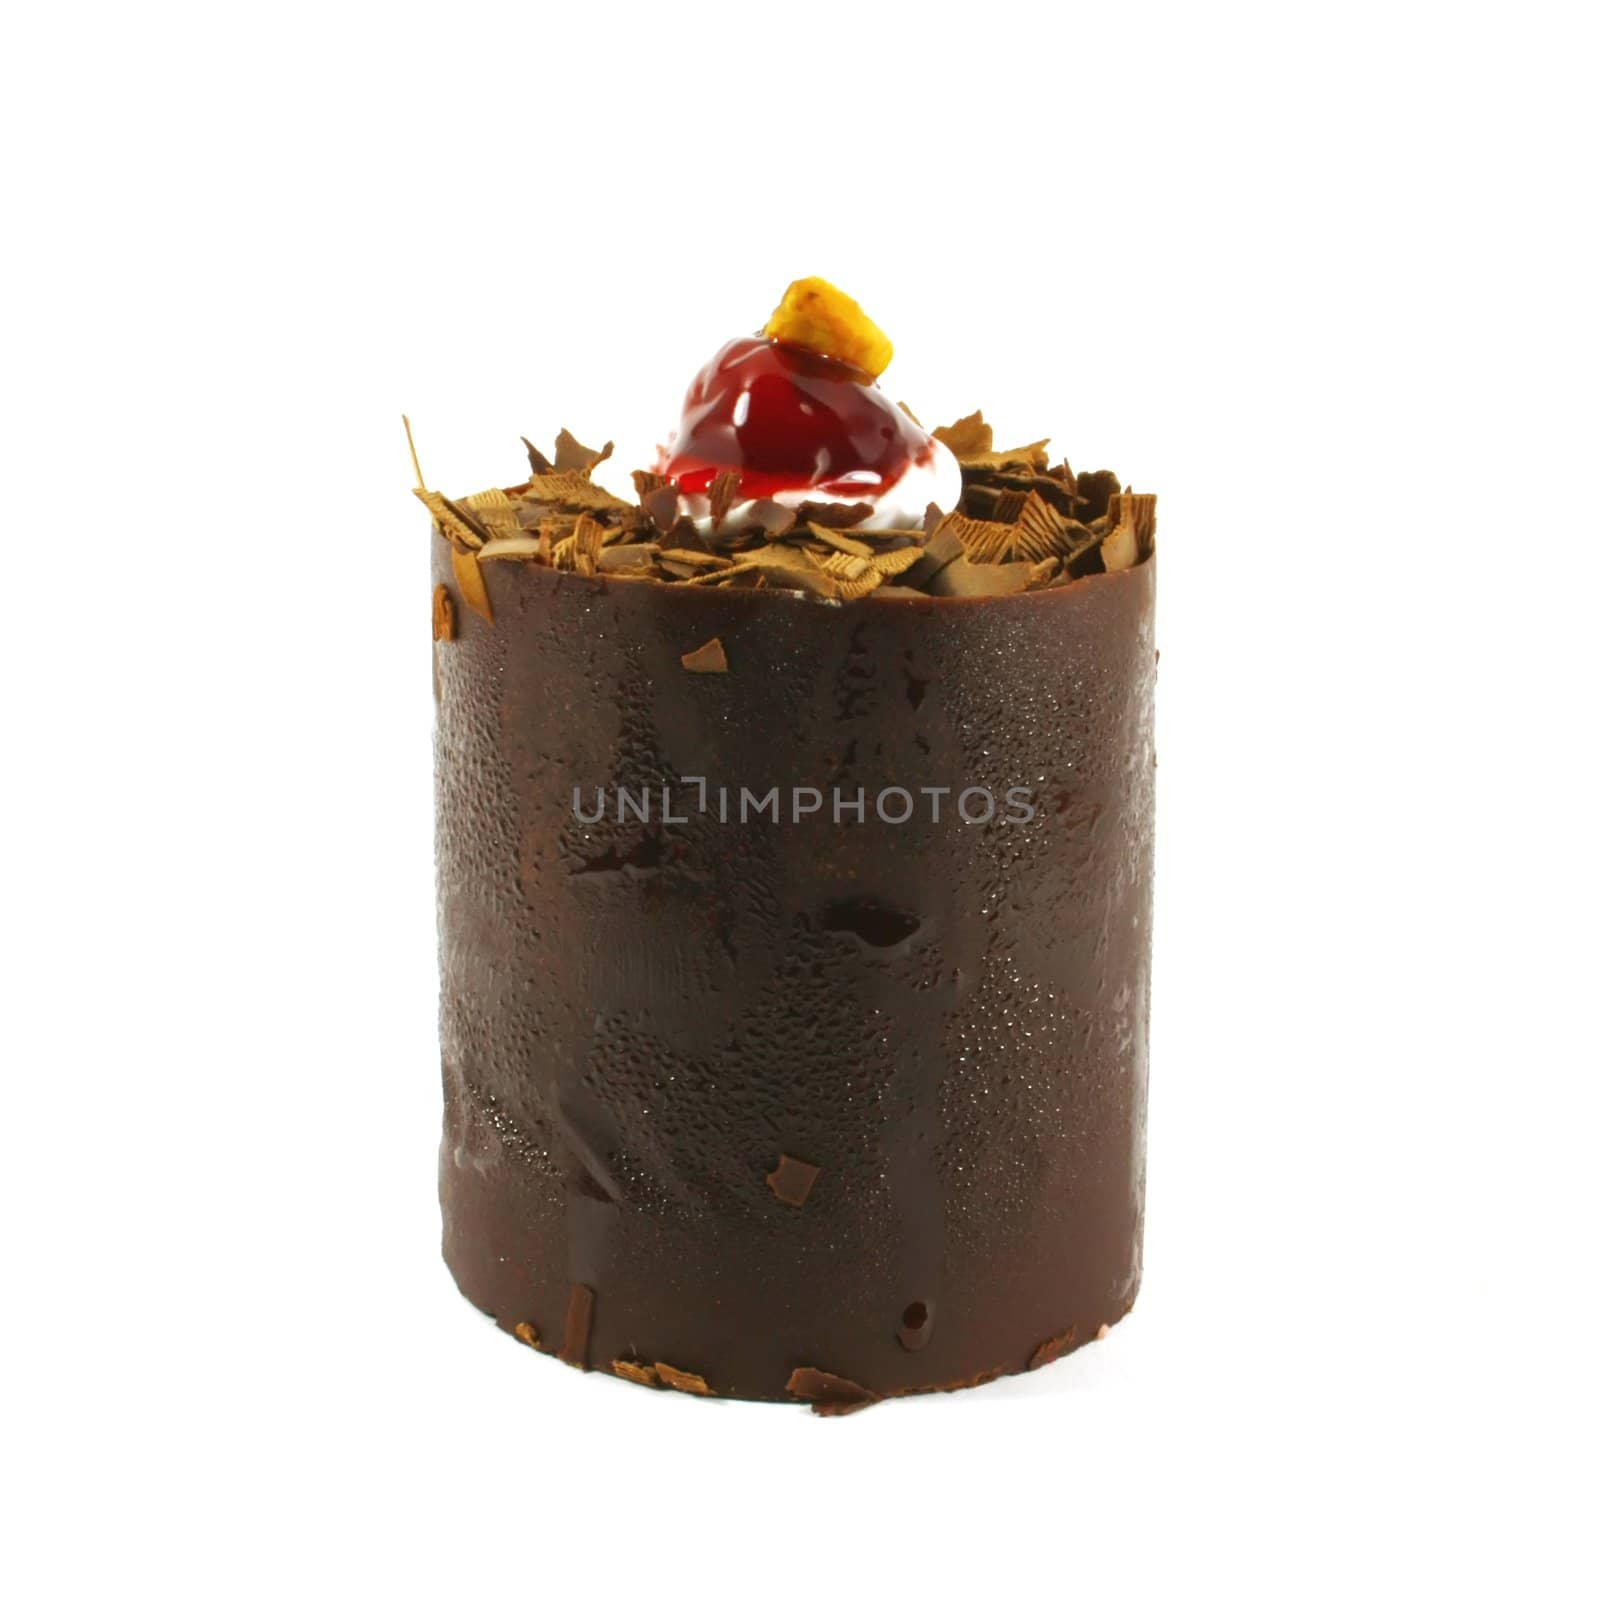 Fancy Chocolate Cake Isolated on a White Background